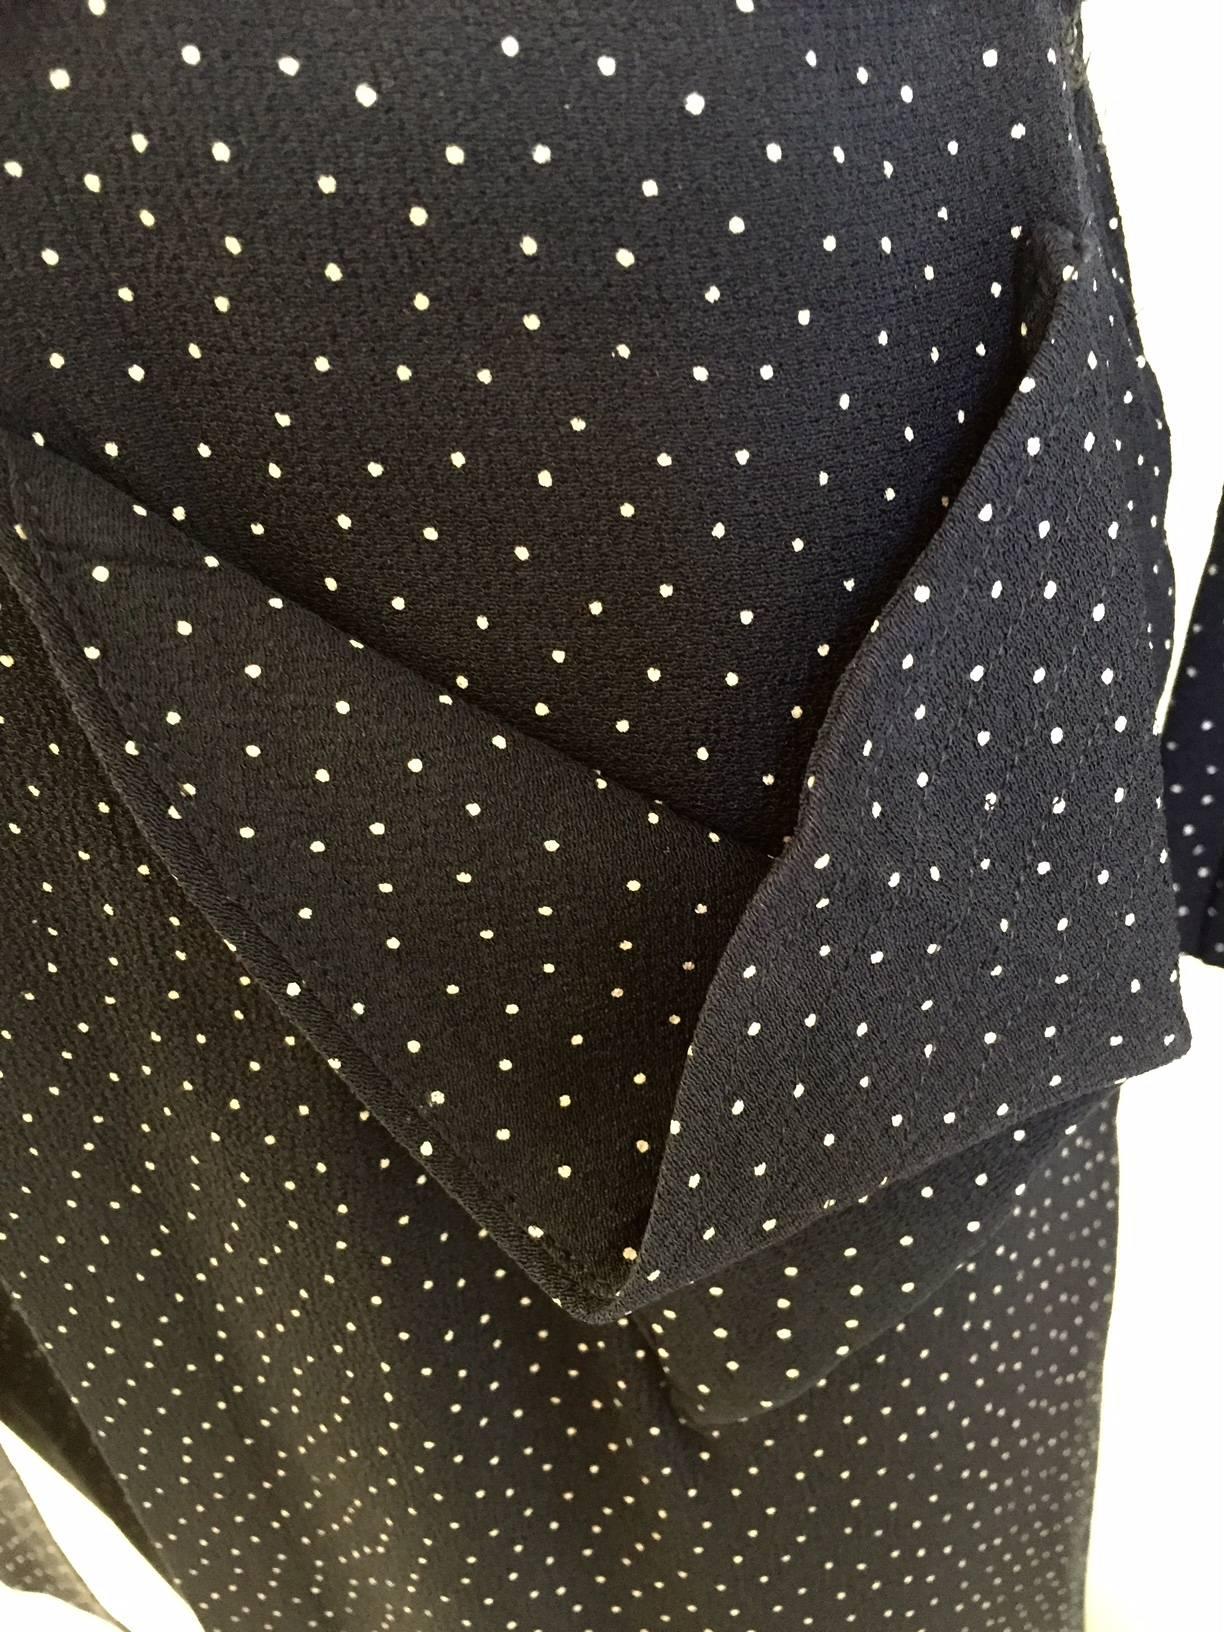 Vintage 1940s Navy Blue Crepe Dress with White Small Polkadots 3